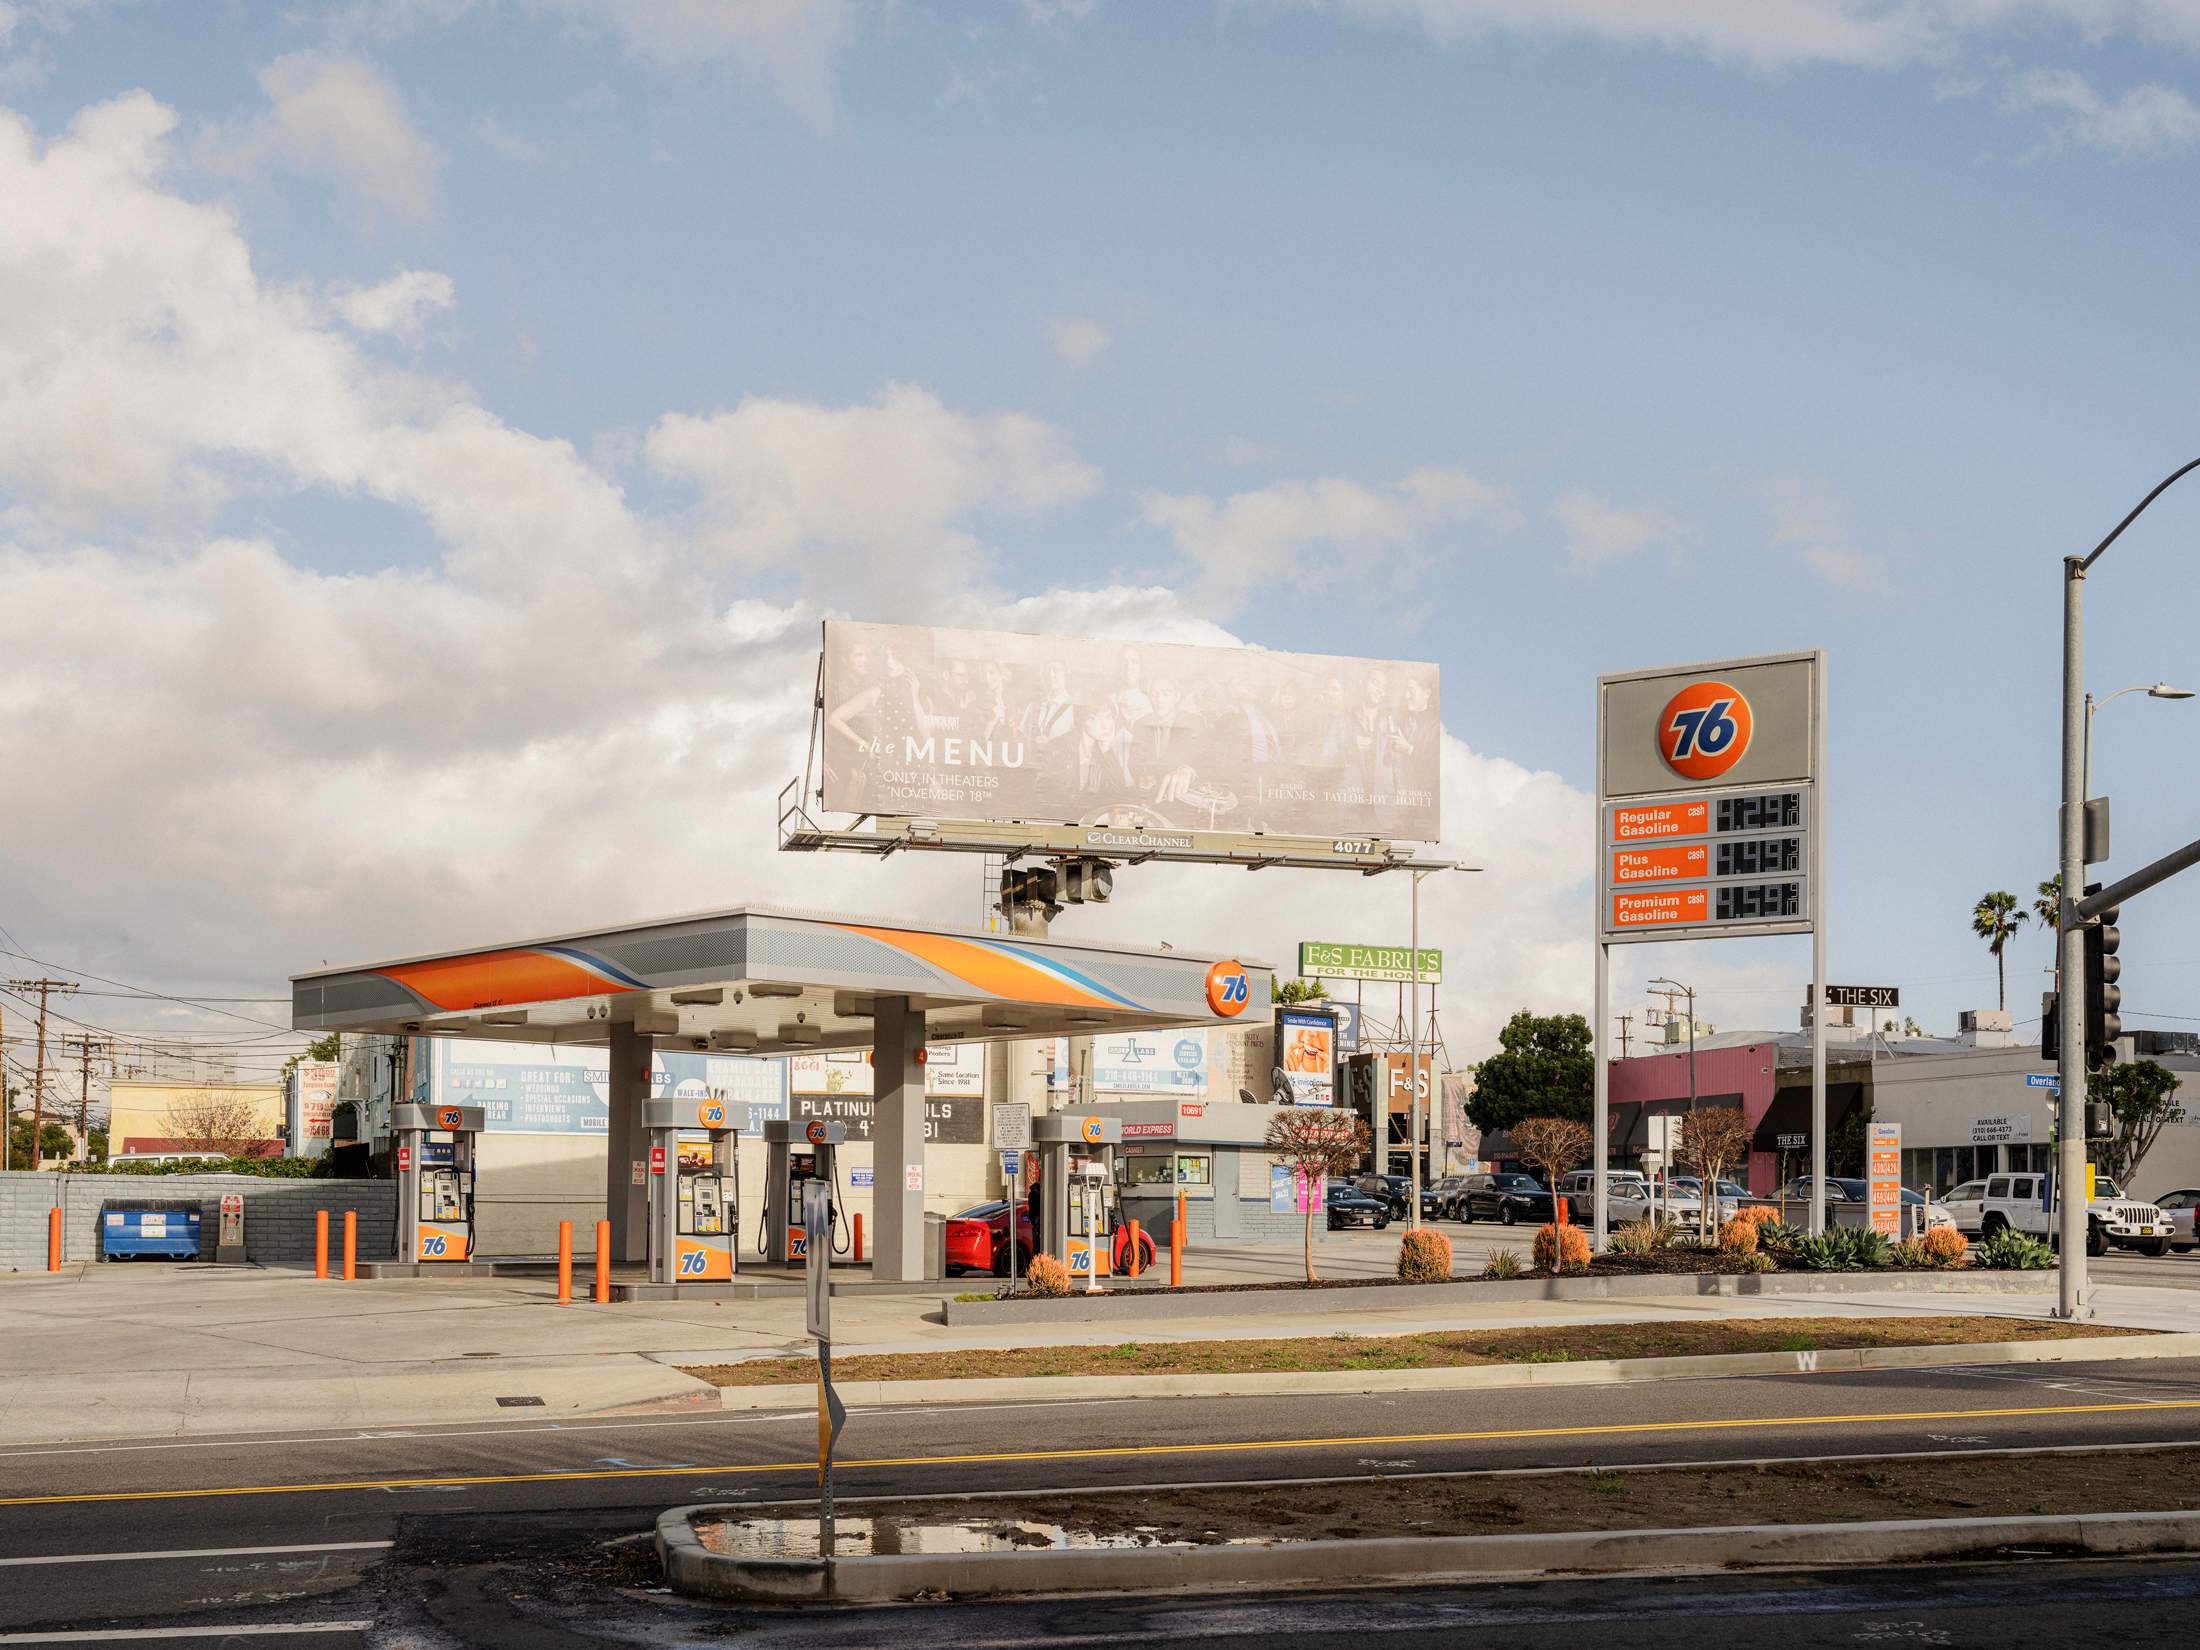 ms-monocle-gas-stations-230116-318.jpg